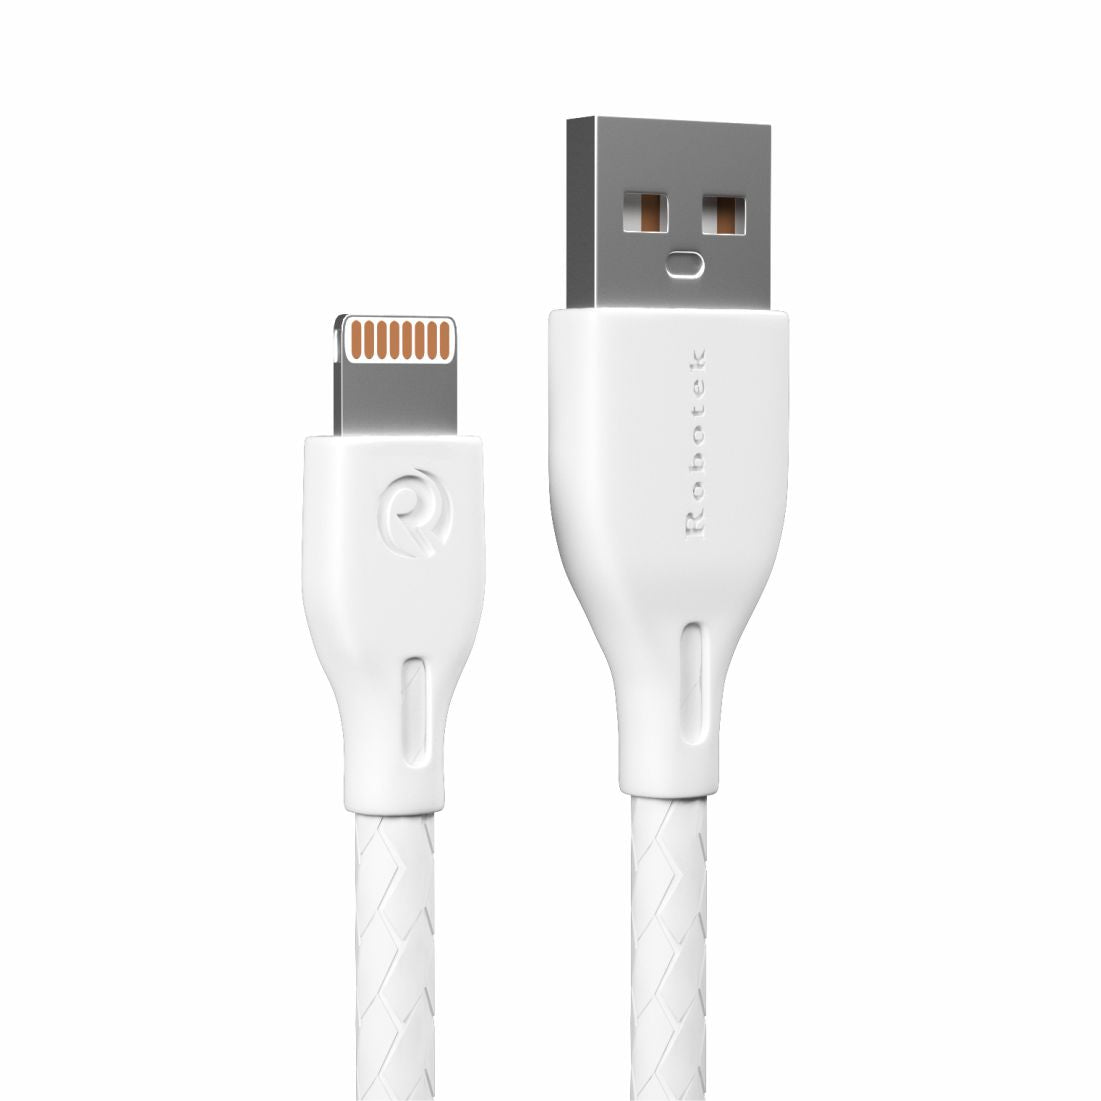 ROBOTEK DC10X USB to iPhone Lightning Fast Charging Cable, 2.4Amp Sync & Fast Charging Cable Compatible for Iphone, Ipad And Ipod. Fast Charging Lightning Cable, Tangle Free TPE Cable, 3.2 Feet (1.0M)